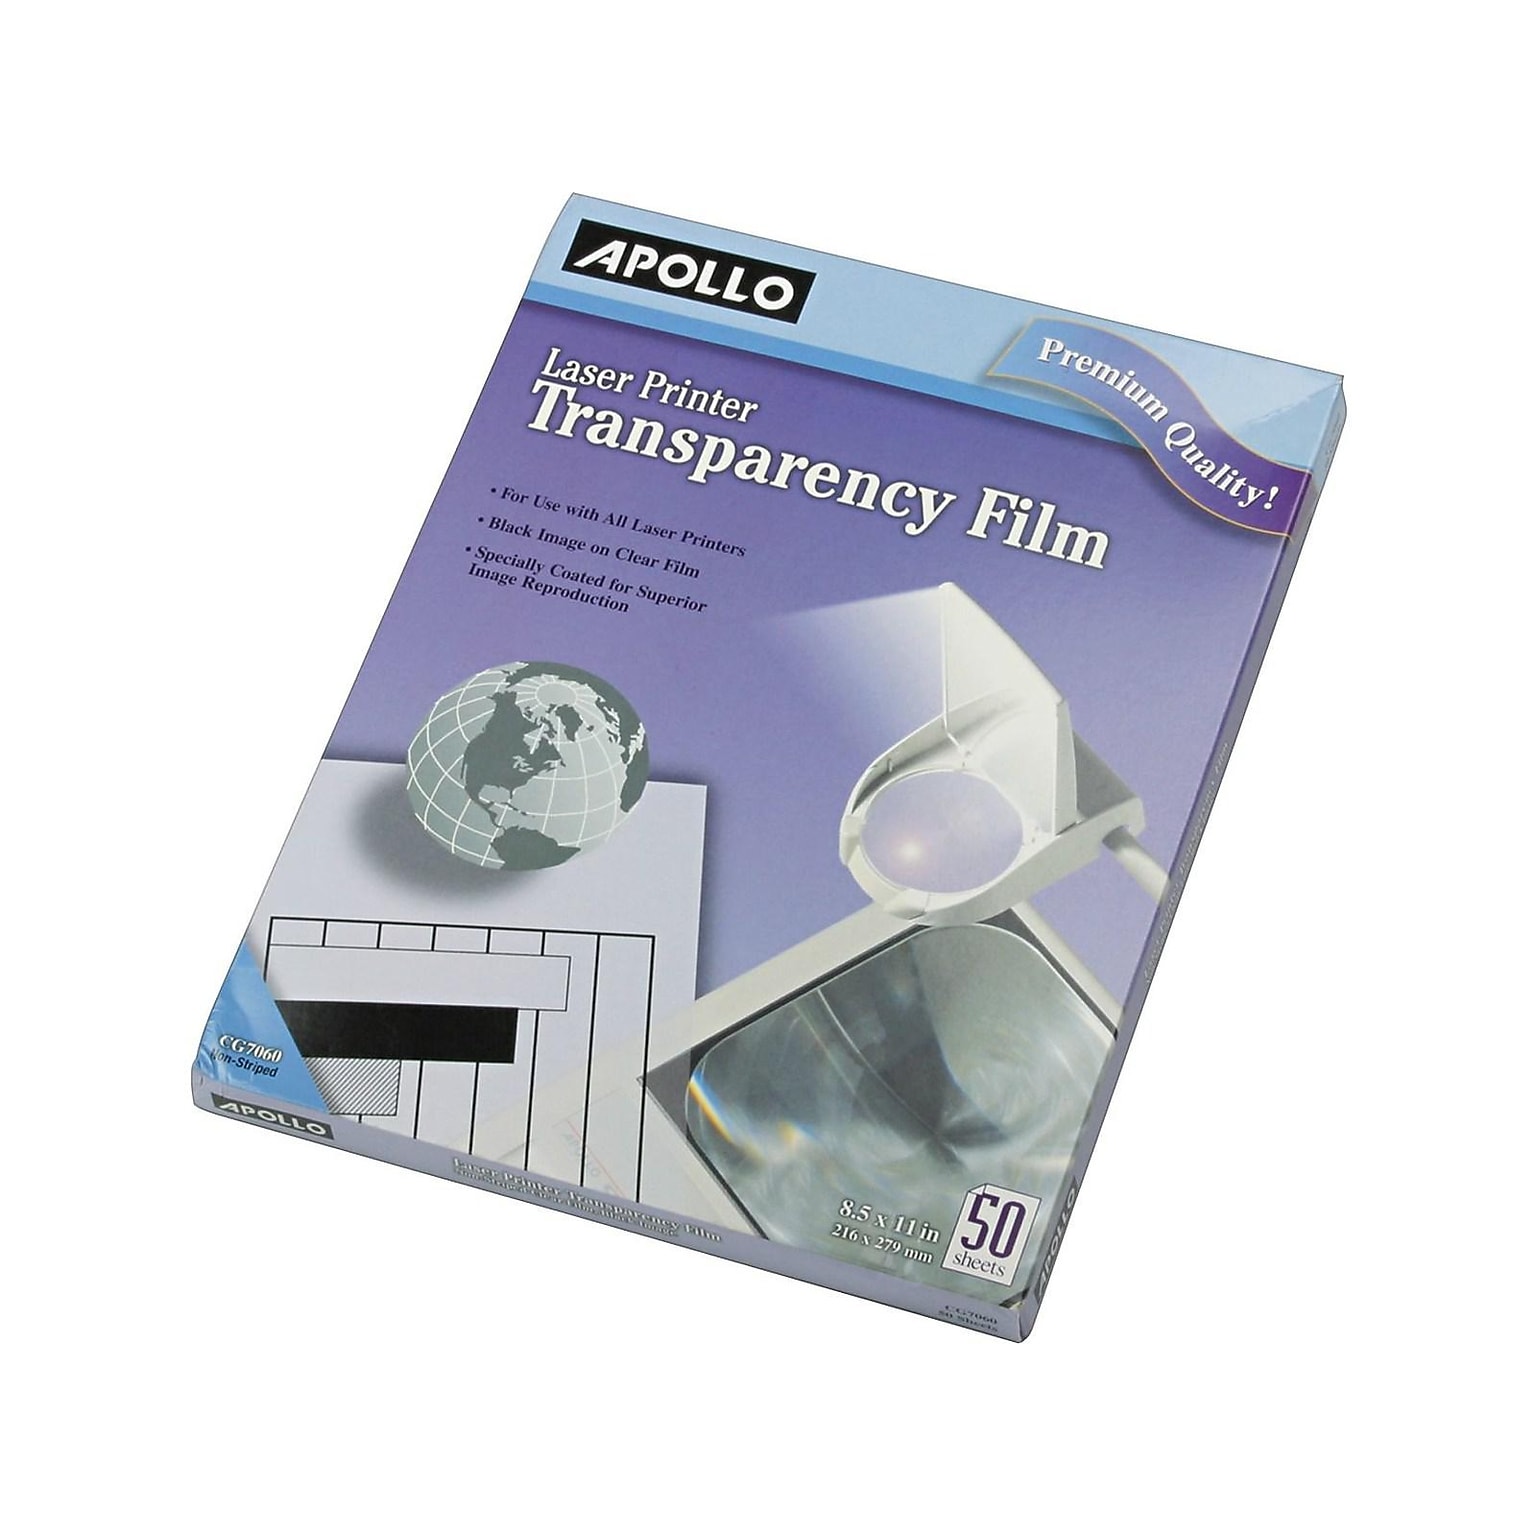 Apollo Transparency Film for Laser Printers, 8.5 x 11, 50/Pack (CG7060)